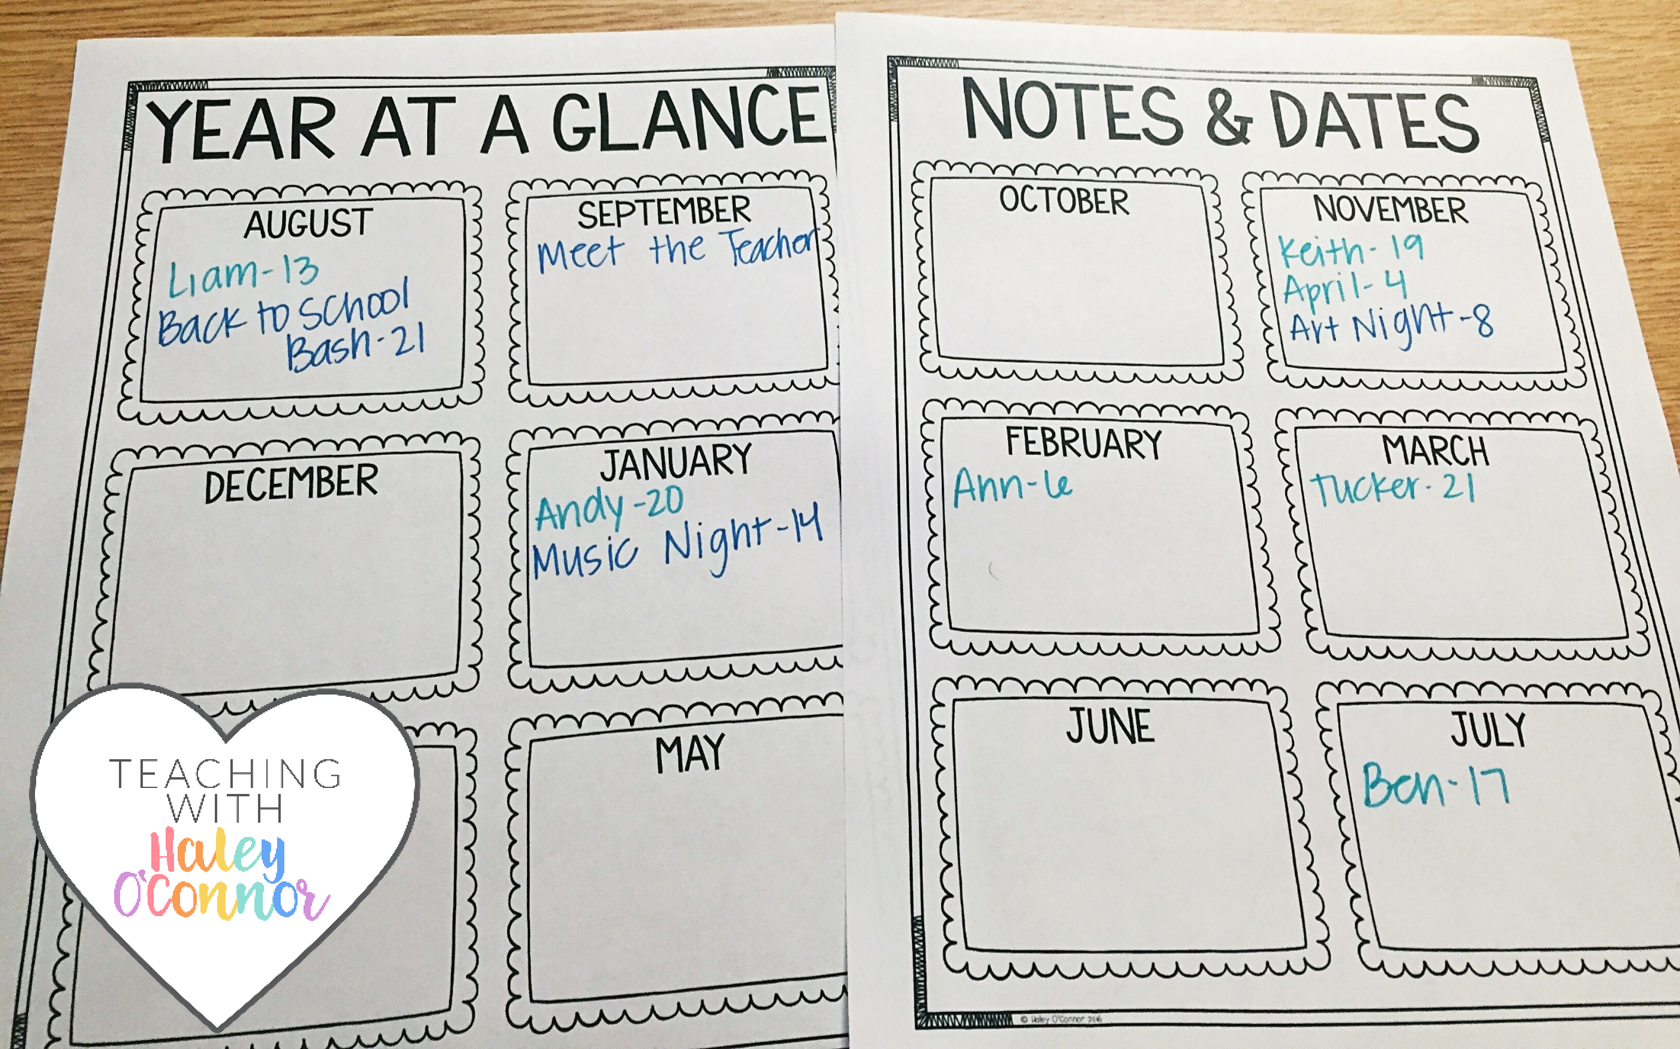 Year at a Glance Page for Teachers by Haley OConnor